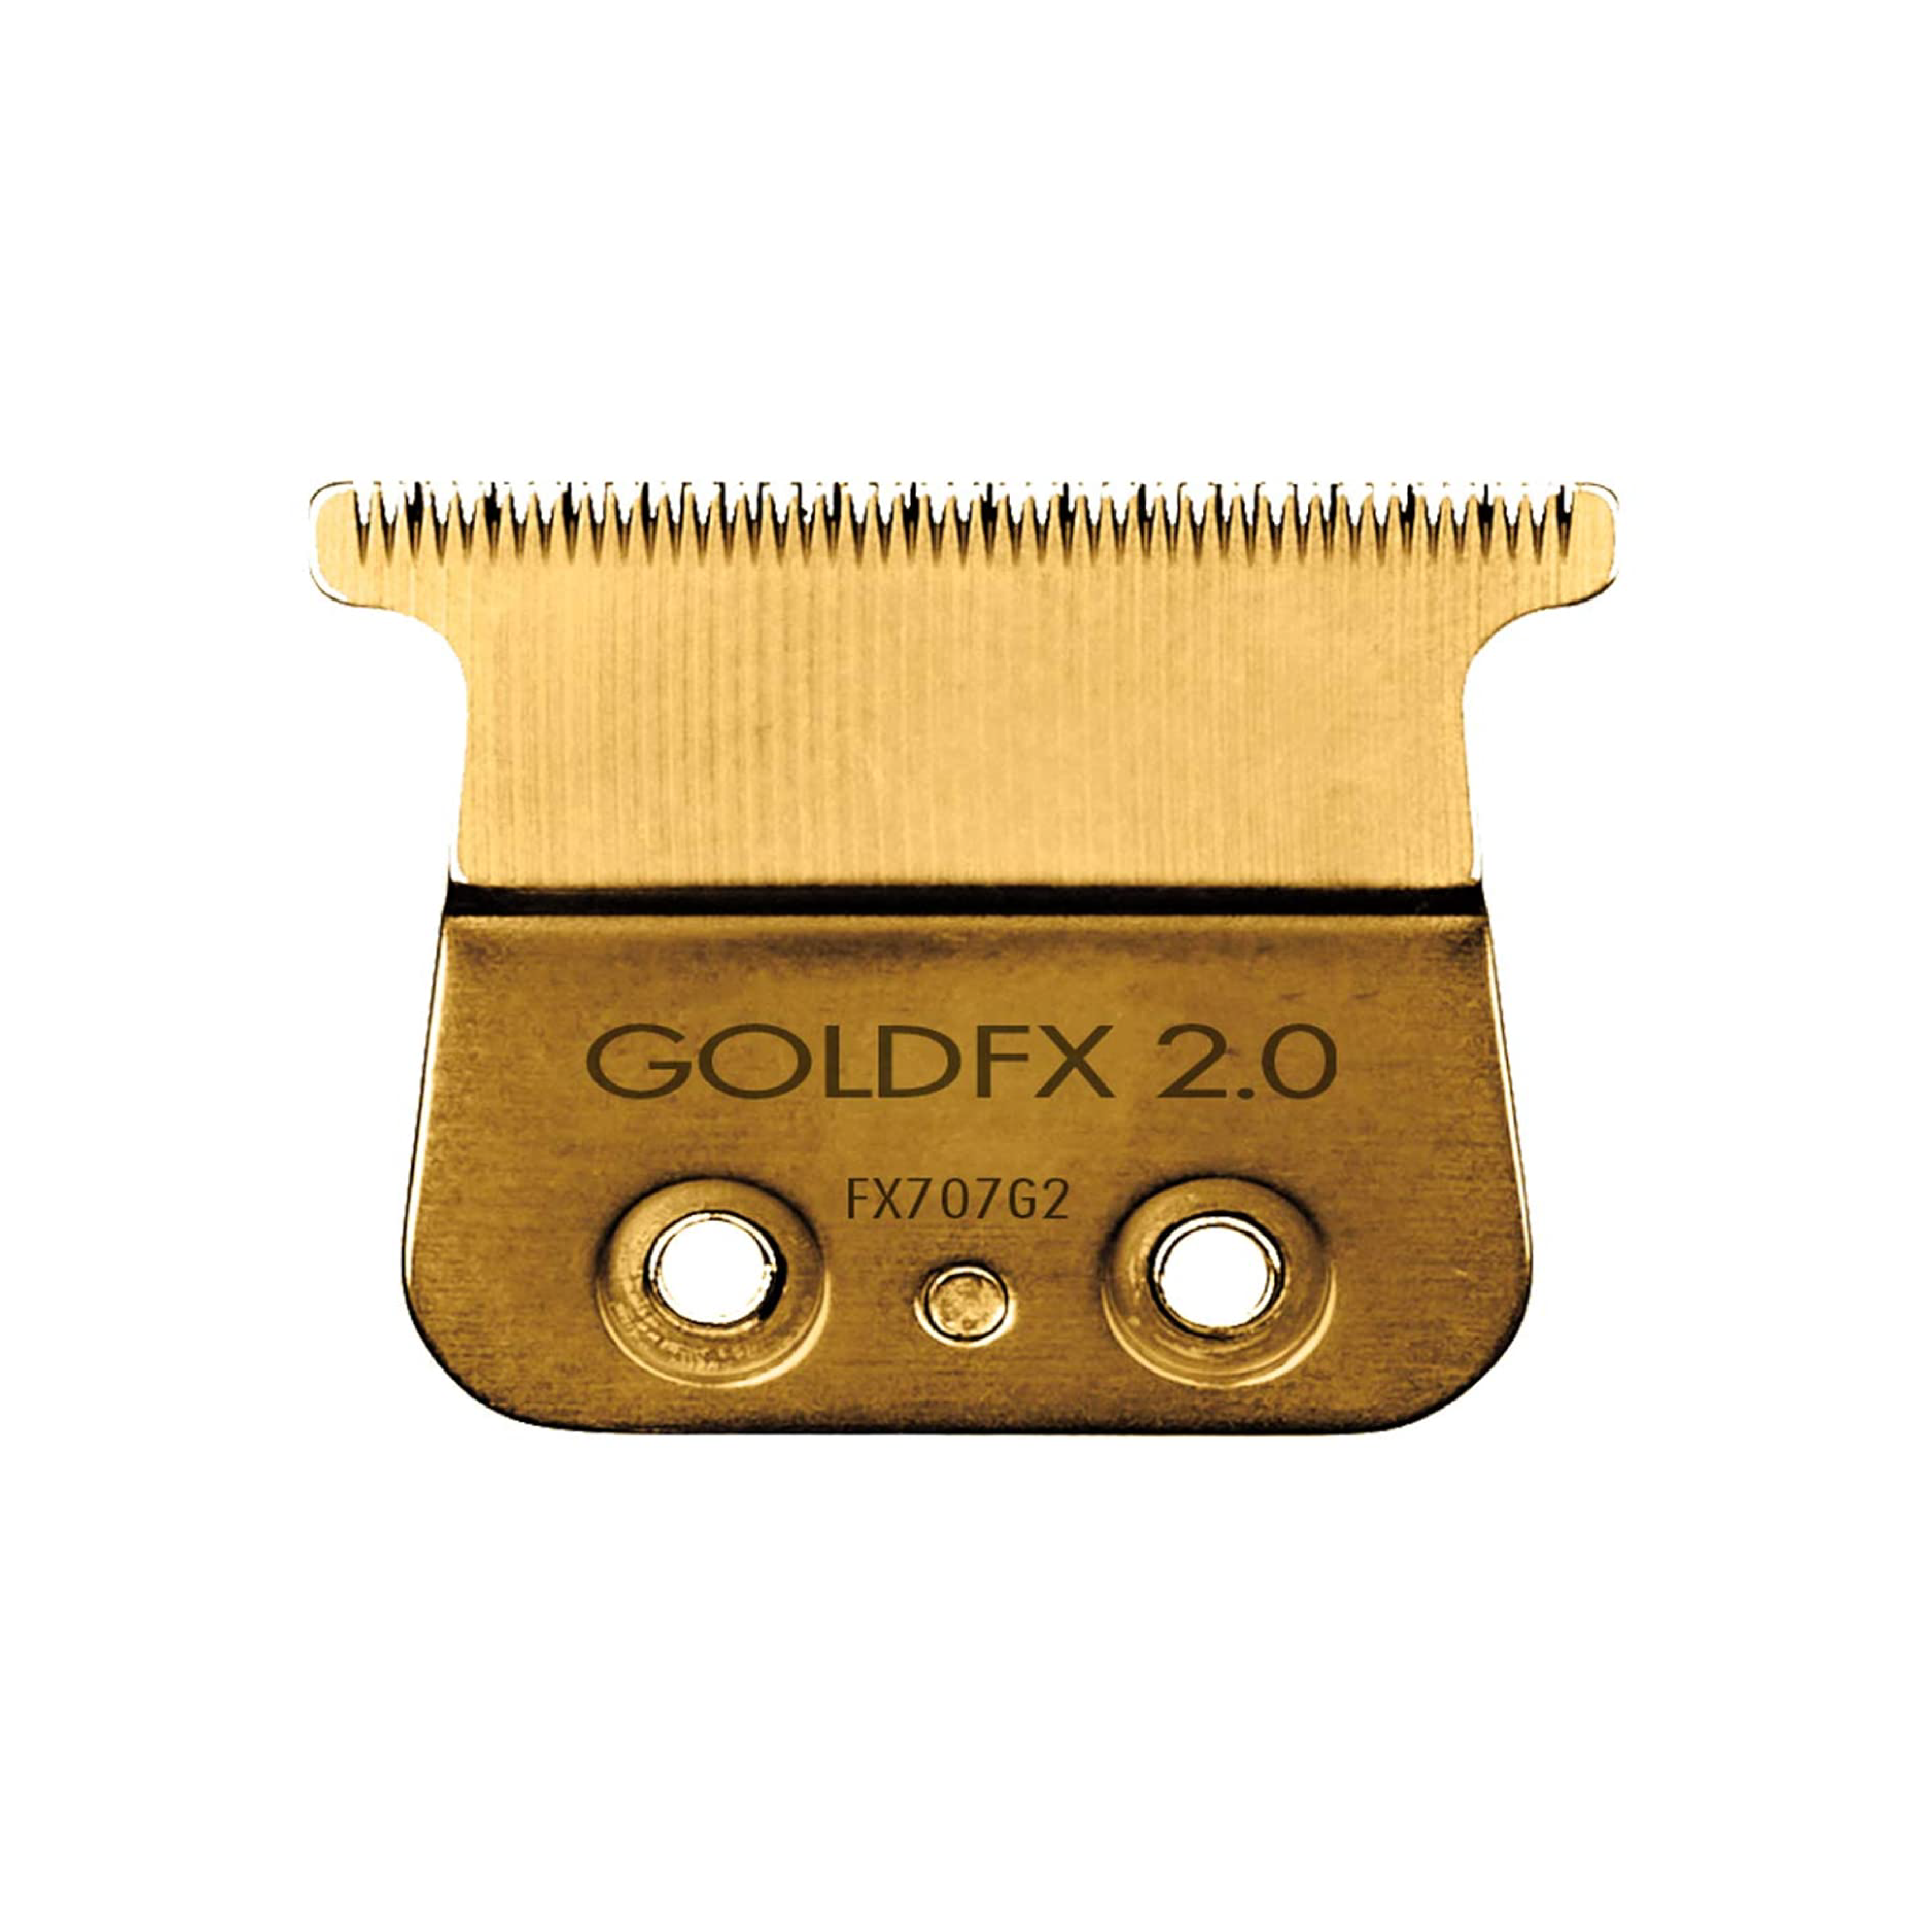 Babyliss PRO Deep Tooth Gold Trimmer Replacement Blade - FX707G2